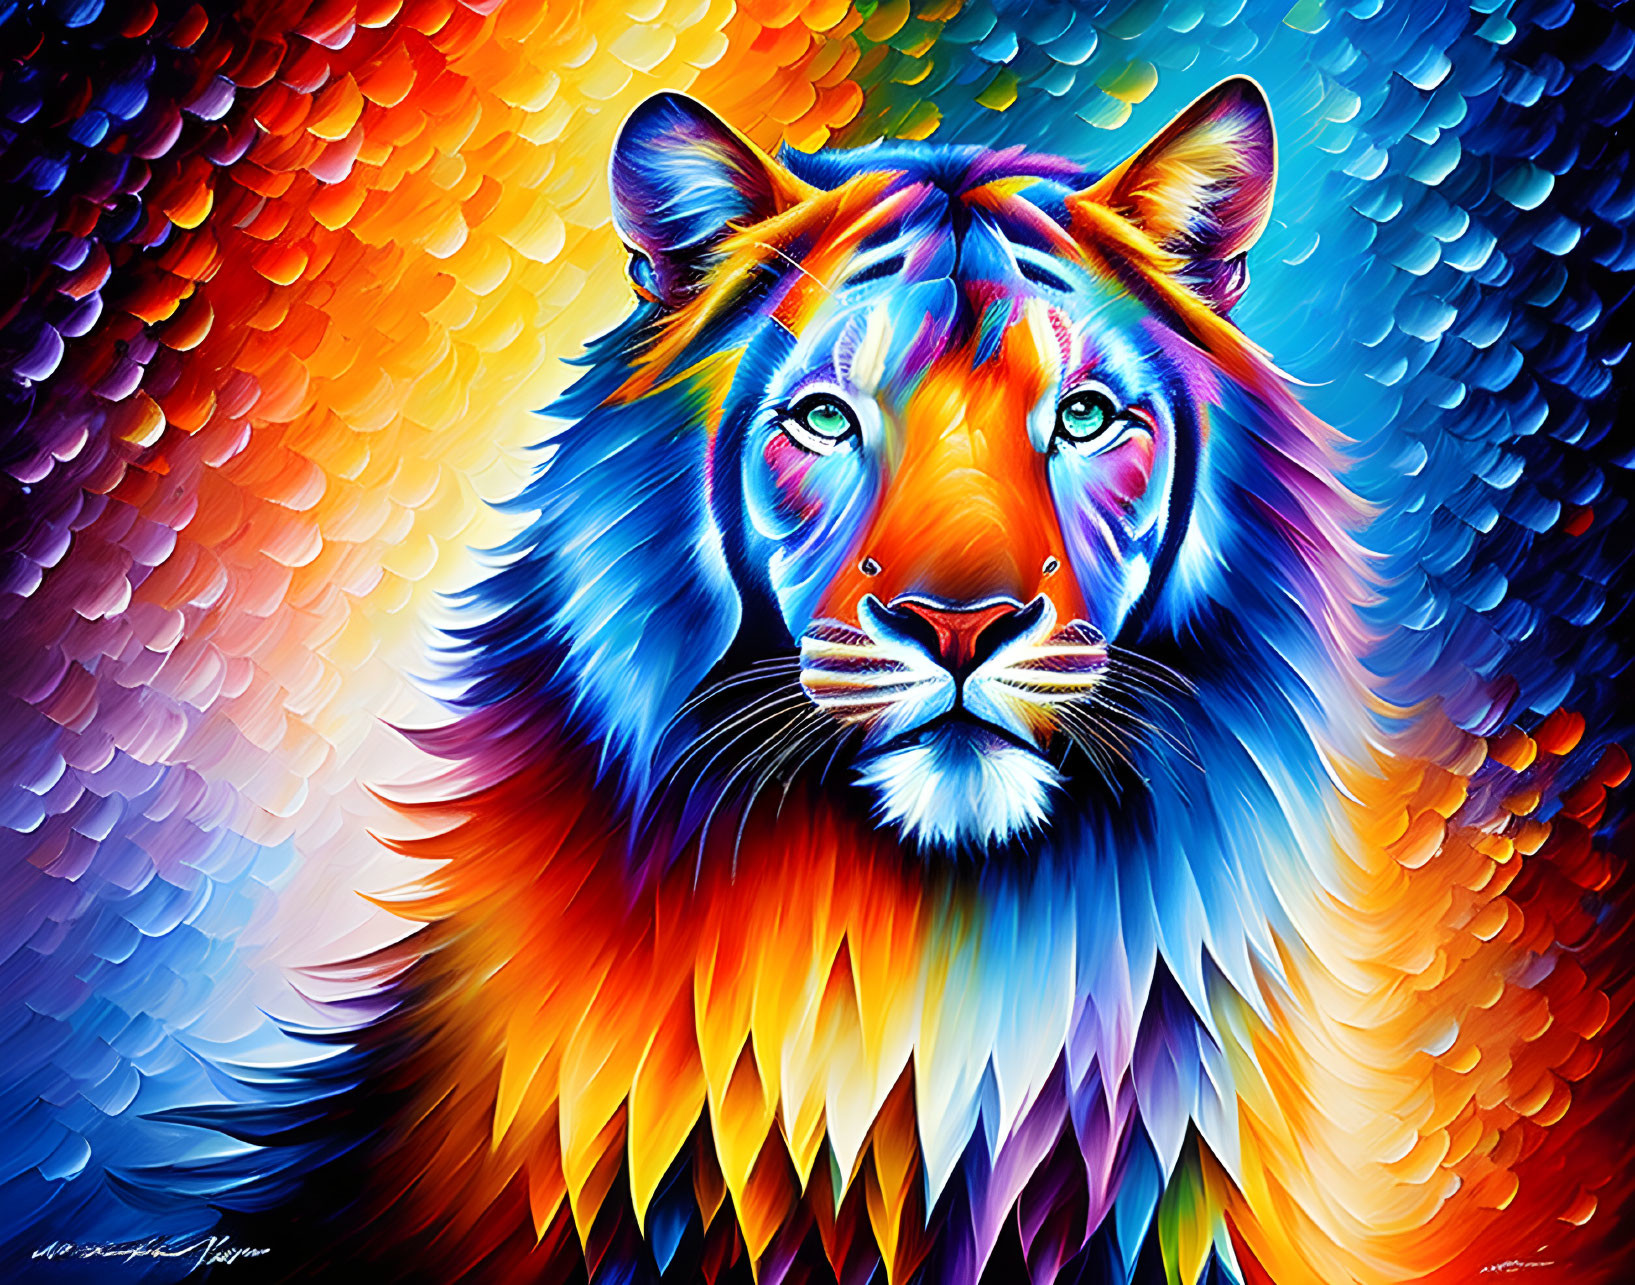 Colorful Lion Painting with Rainbow Mane and Blue Eyes on Textured Background